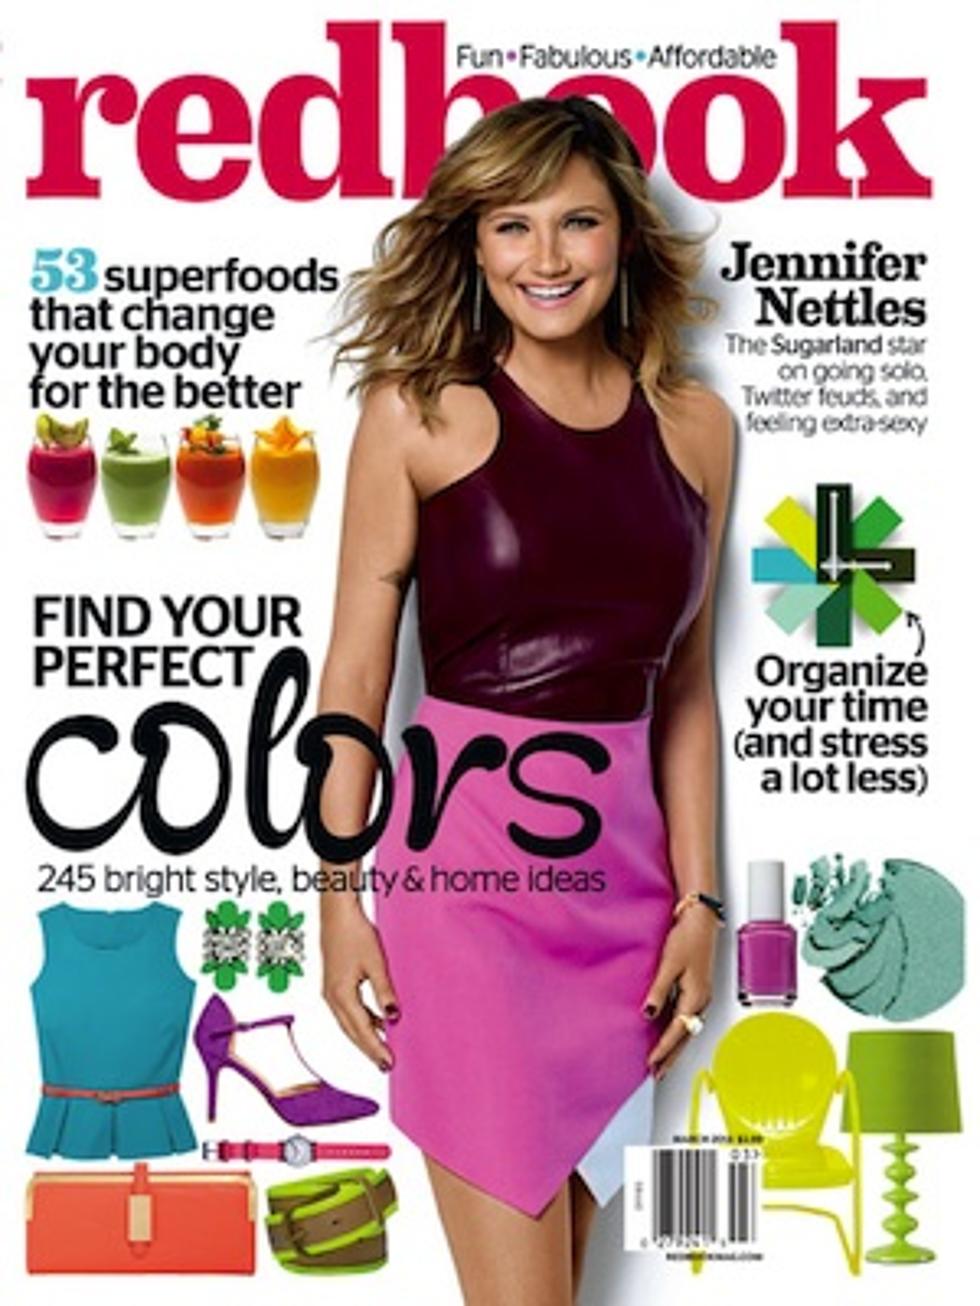 Jennifer Nettles Covers Redbook, Admits Struggle With Perfectionism